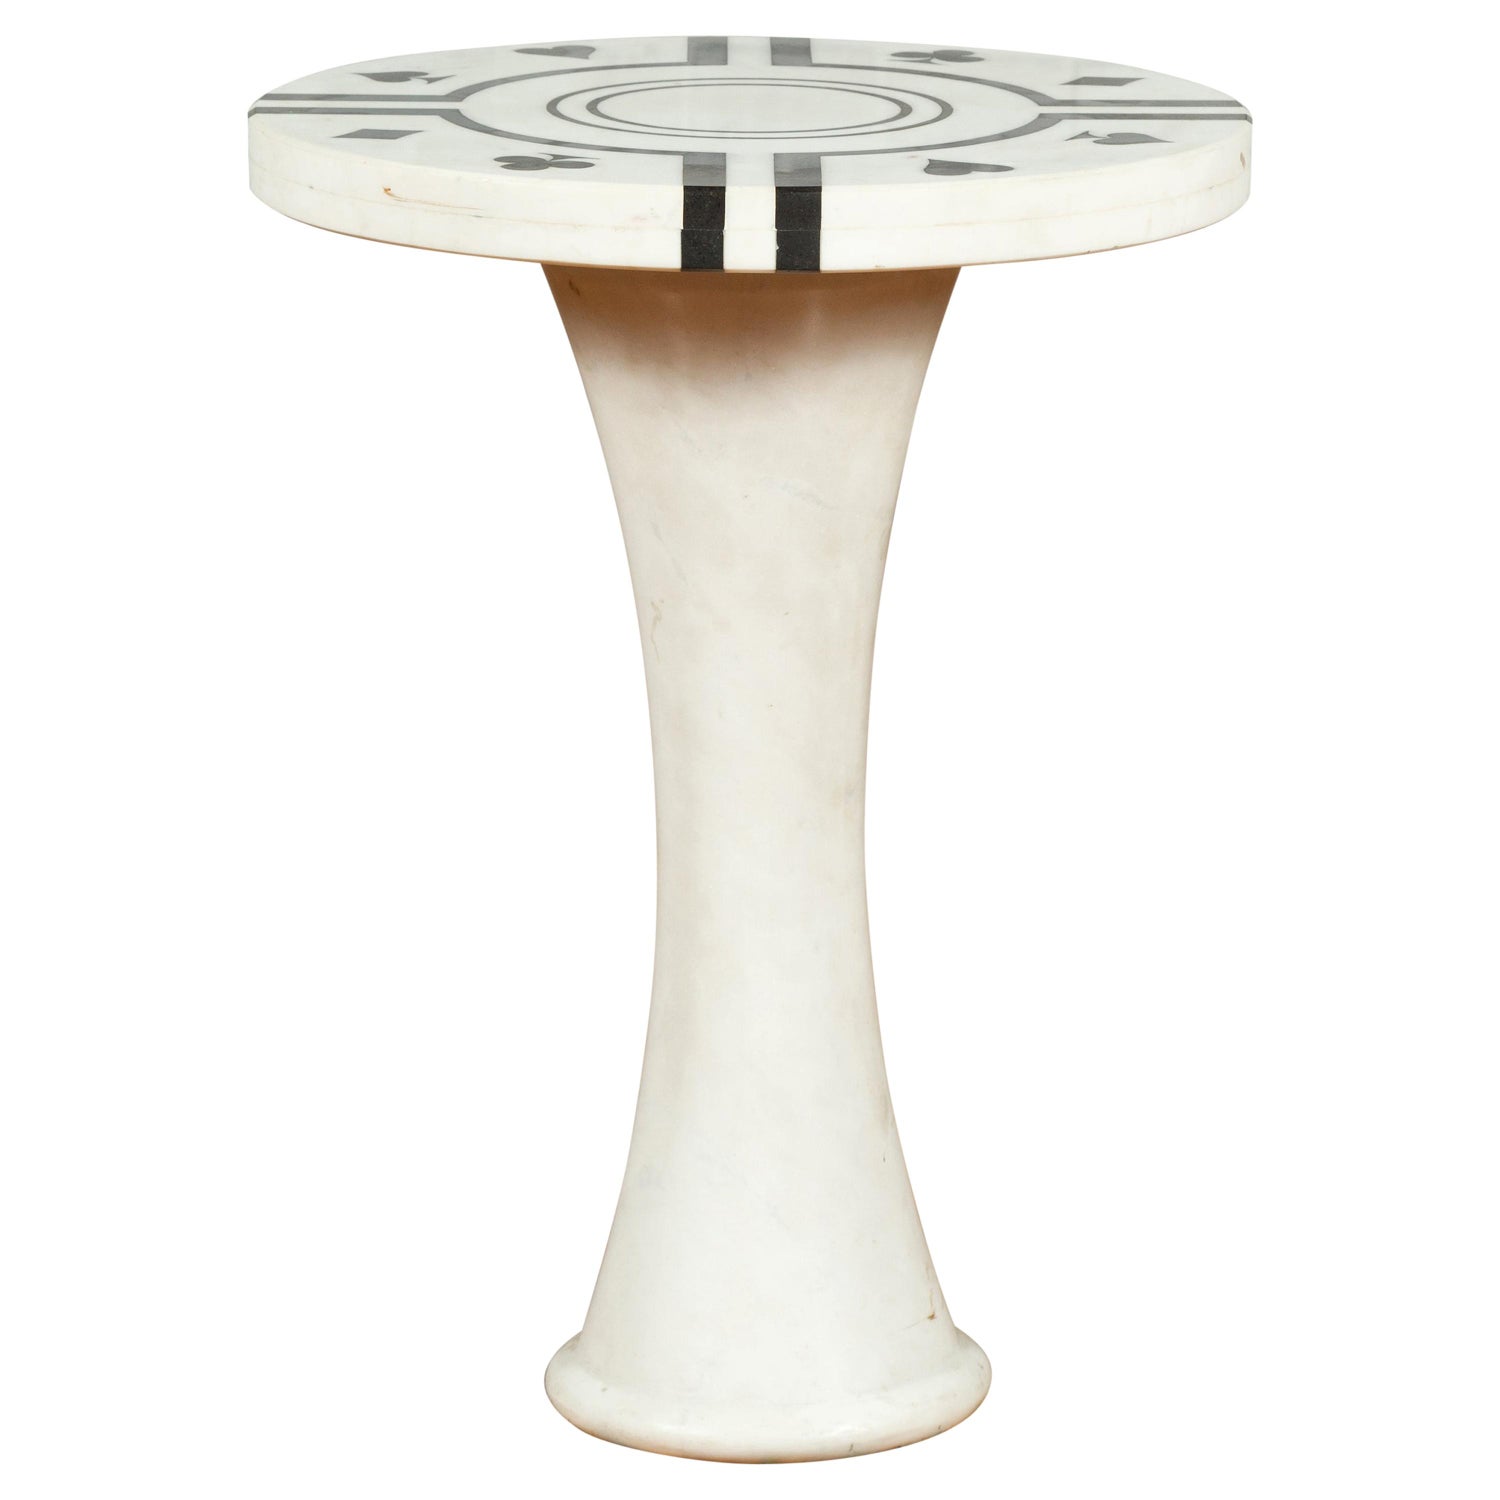 https://a.1stdibscdn.com/white-marble-side-table-with-poker-design-round-top-and-pedestal-hourglass-base-for-sale/1121189/f_226754821614416303907/22675482_master.jpg?width=1500